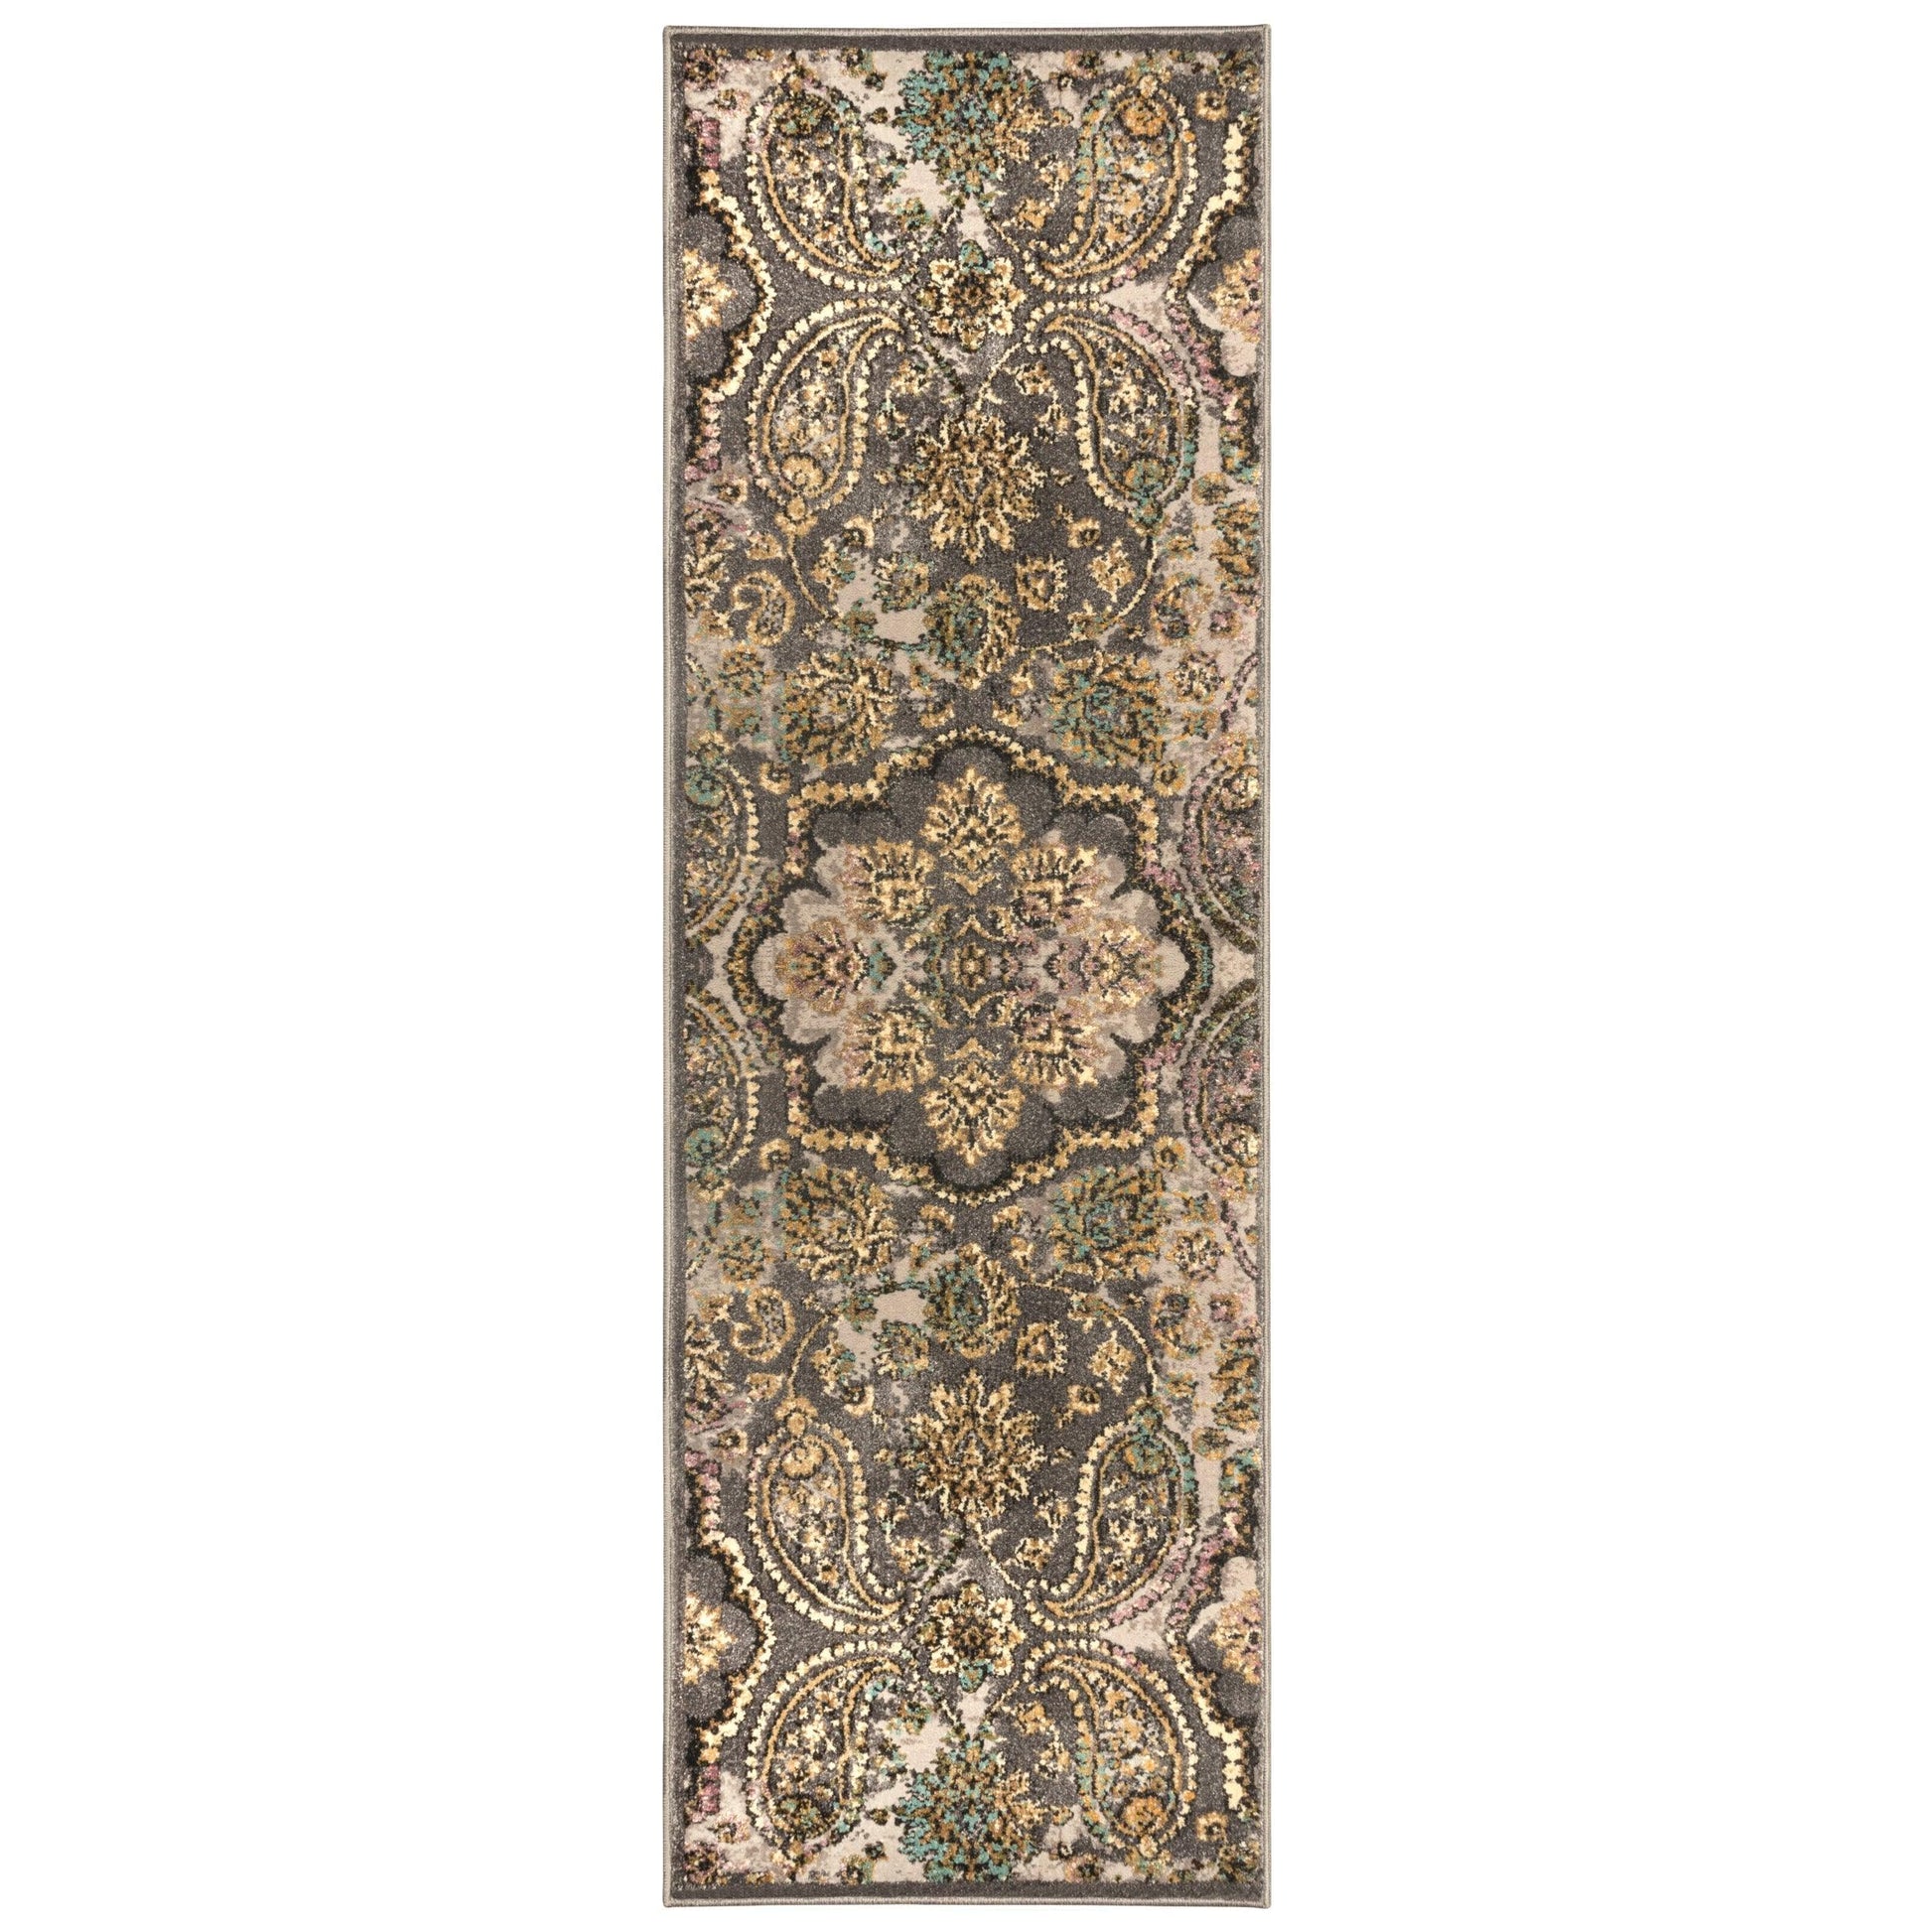 Cypress Oriental Floral Paisley Rug FredCo